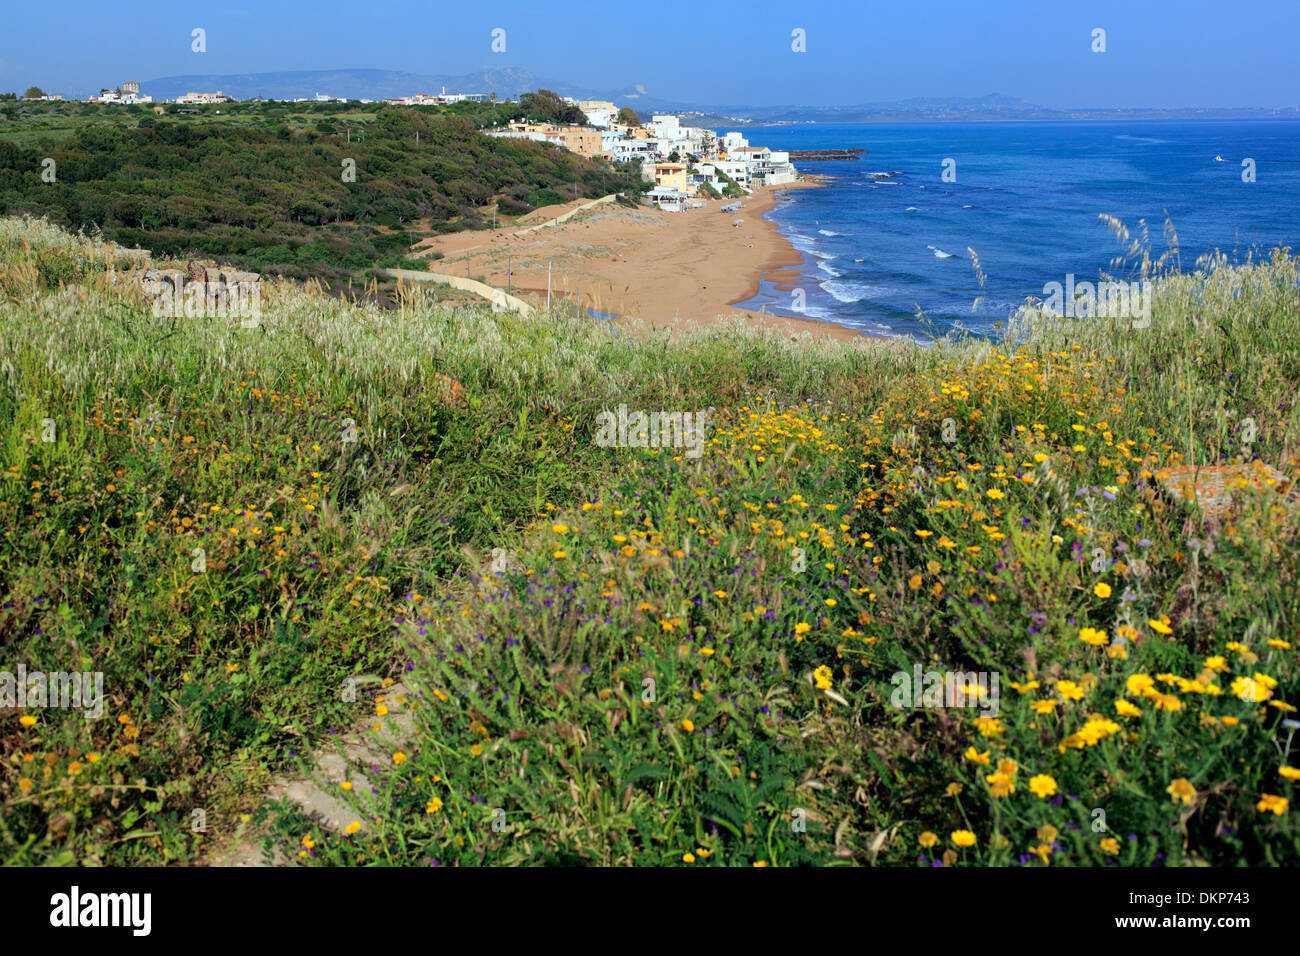 View of sea shore from acropolis, Selinunte, Sicily, Italy Stock Photo